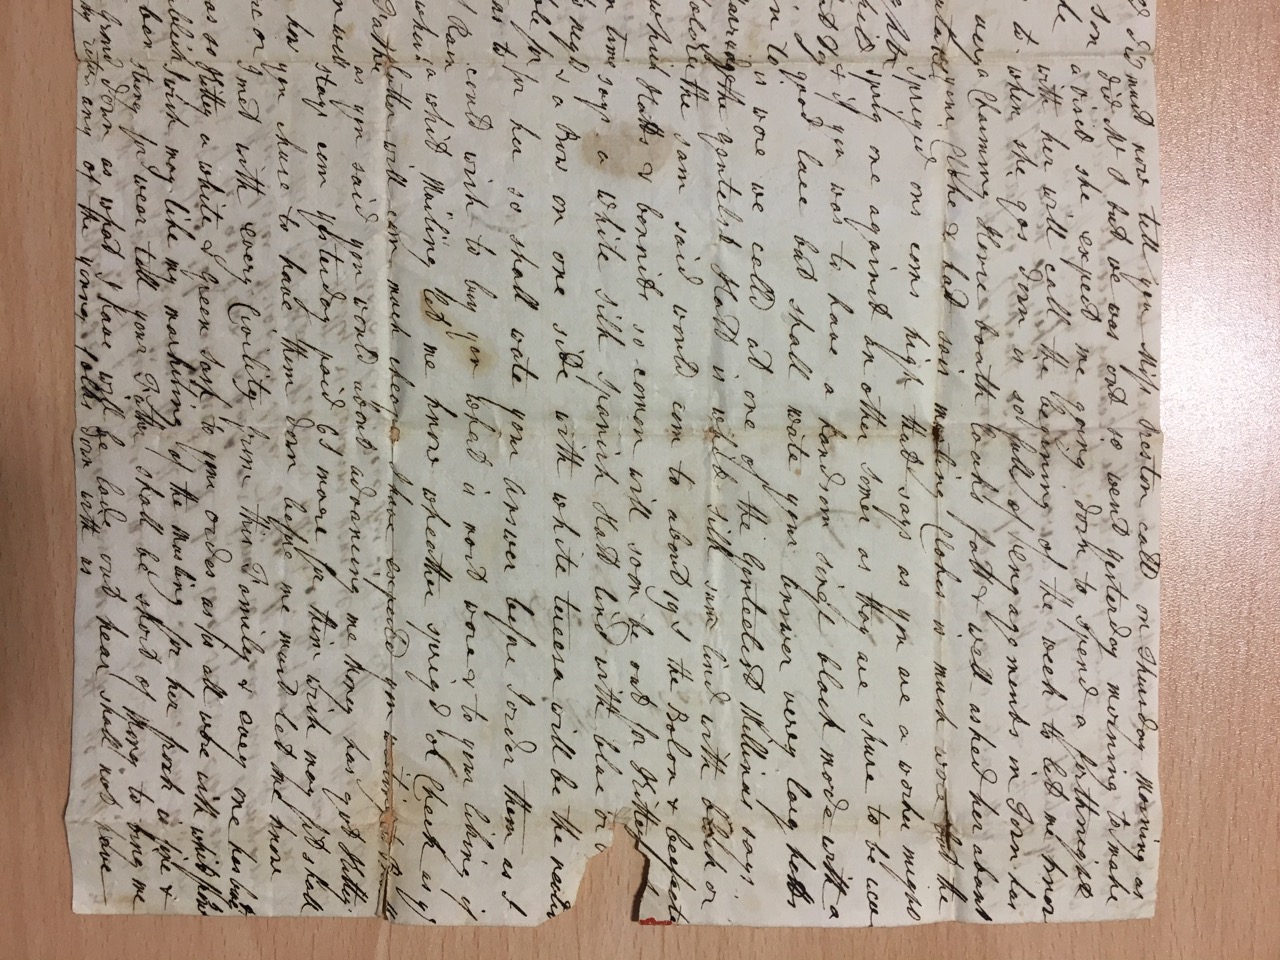 Image #3 of letter: Catherine Elliott to Ann Hare, 29 May 1785